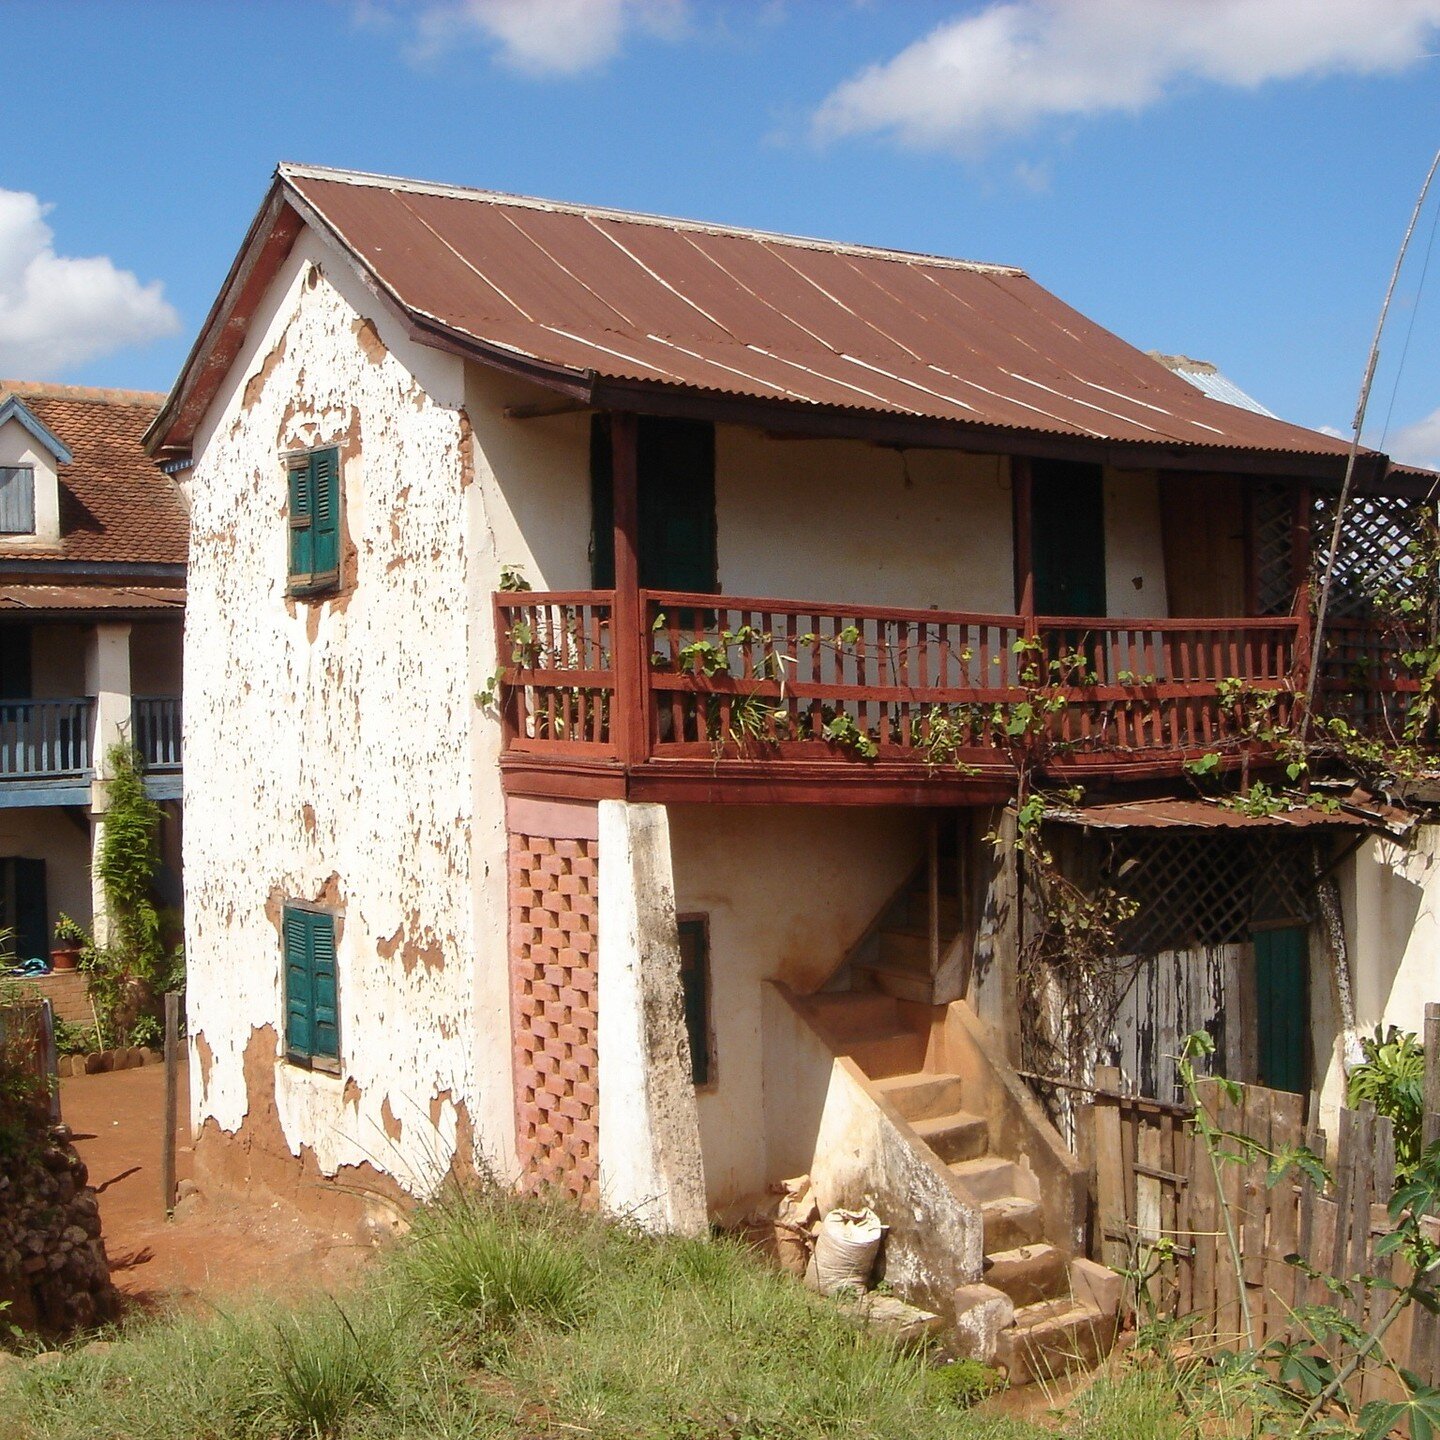 These elegant mass and moulded earth houses are in Madagascar where they are built and maintained with and by local people, materials and skills...